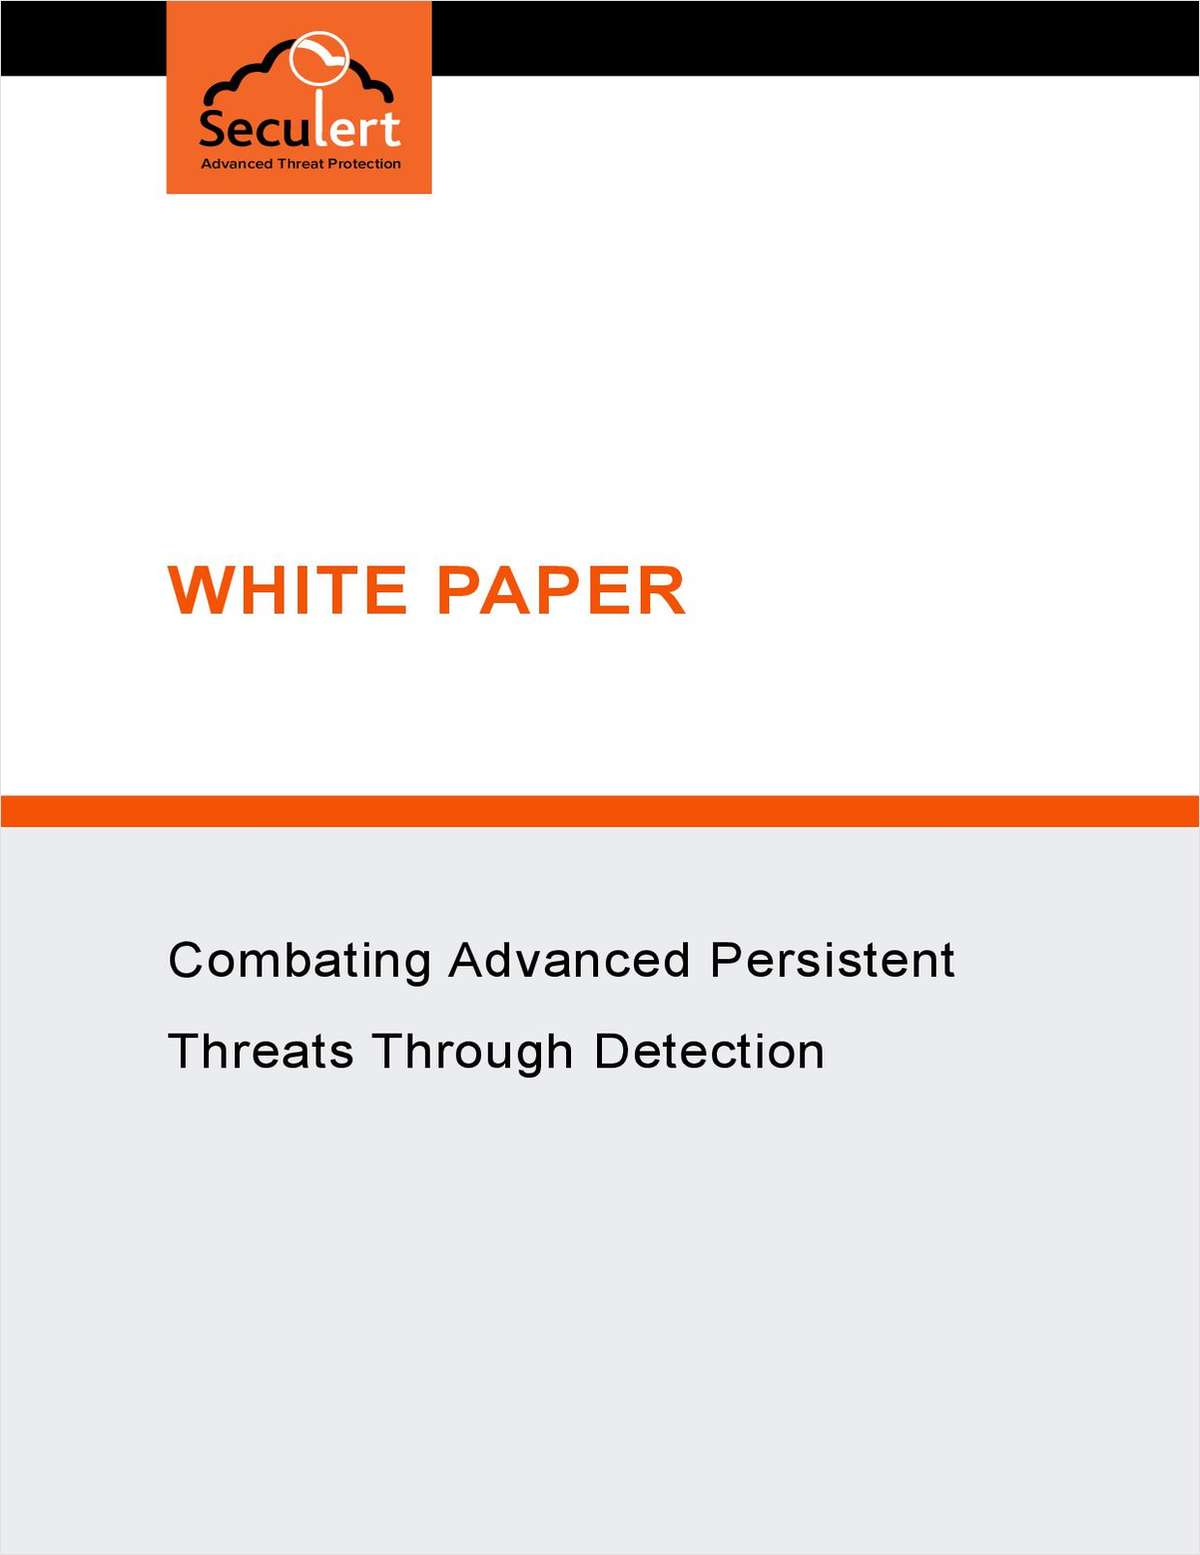 Combating Advanced Persistent Threats through Detection